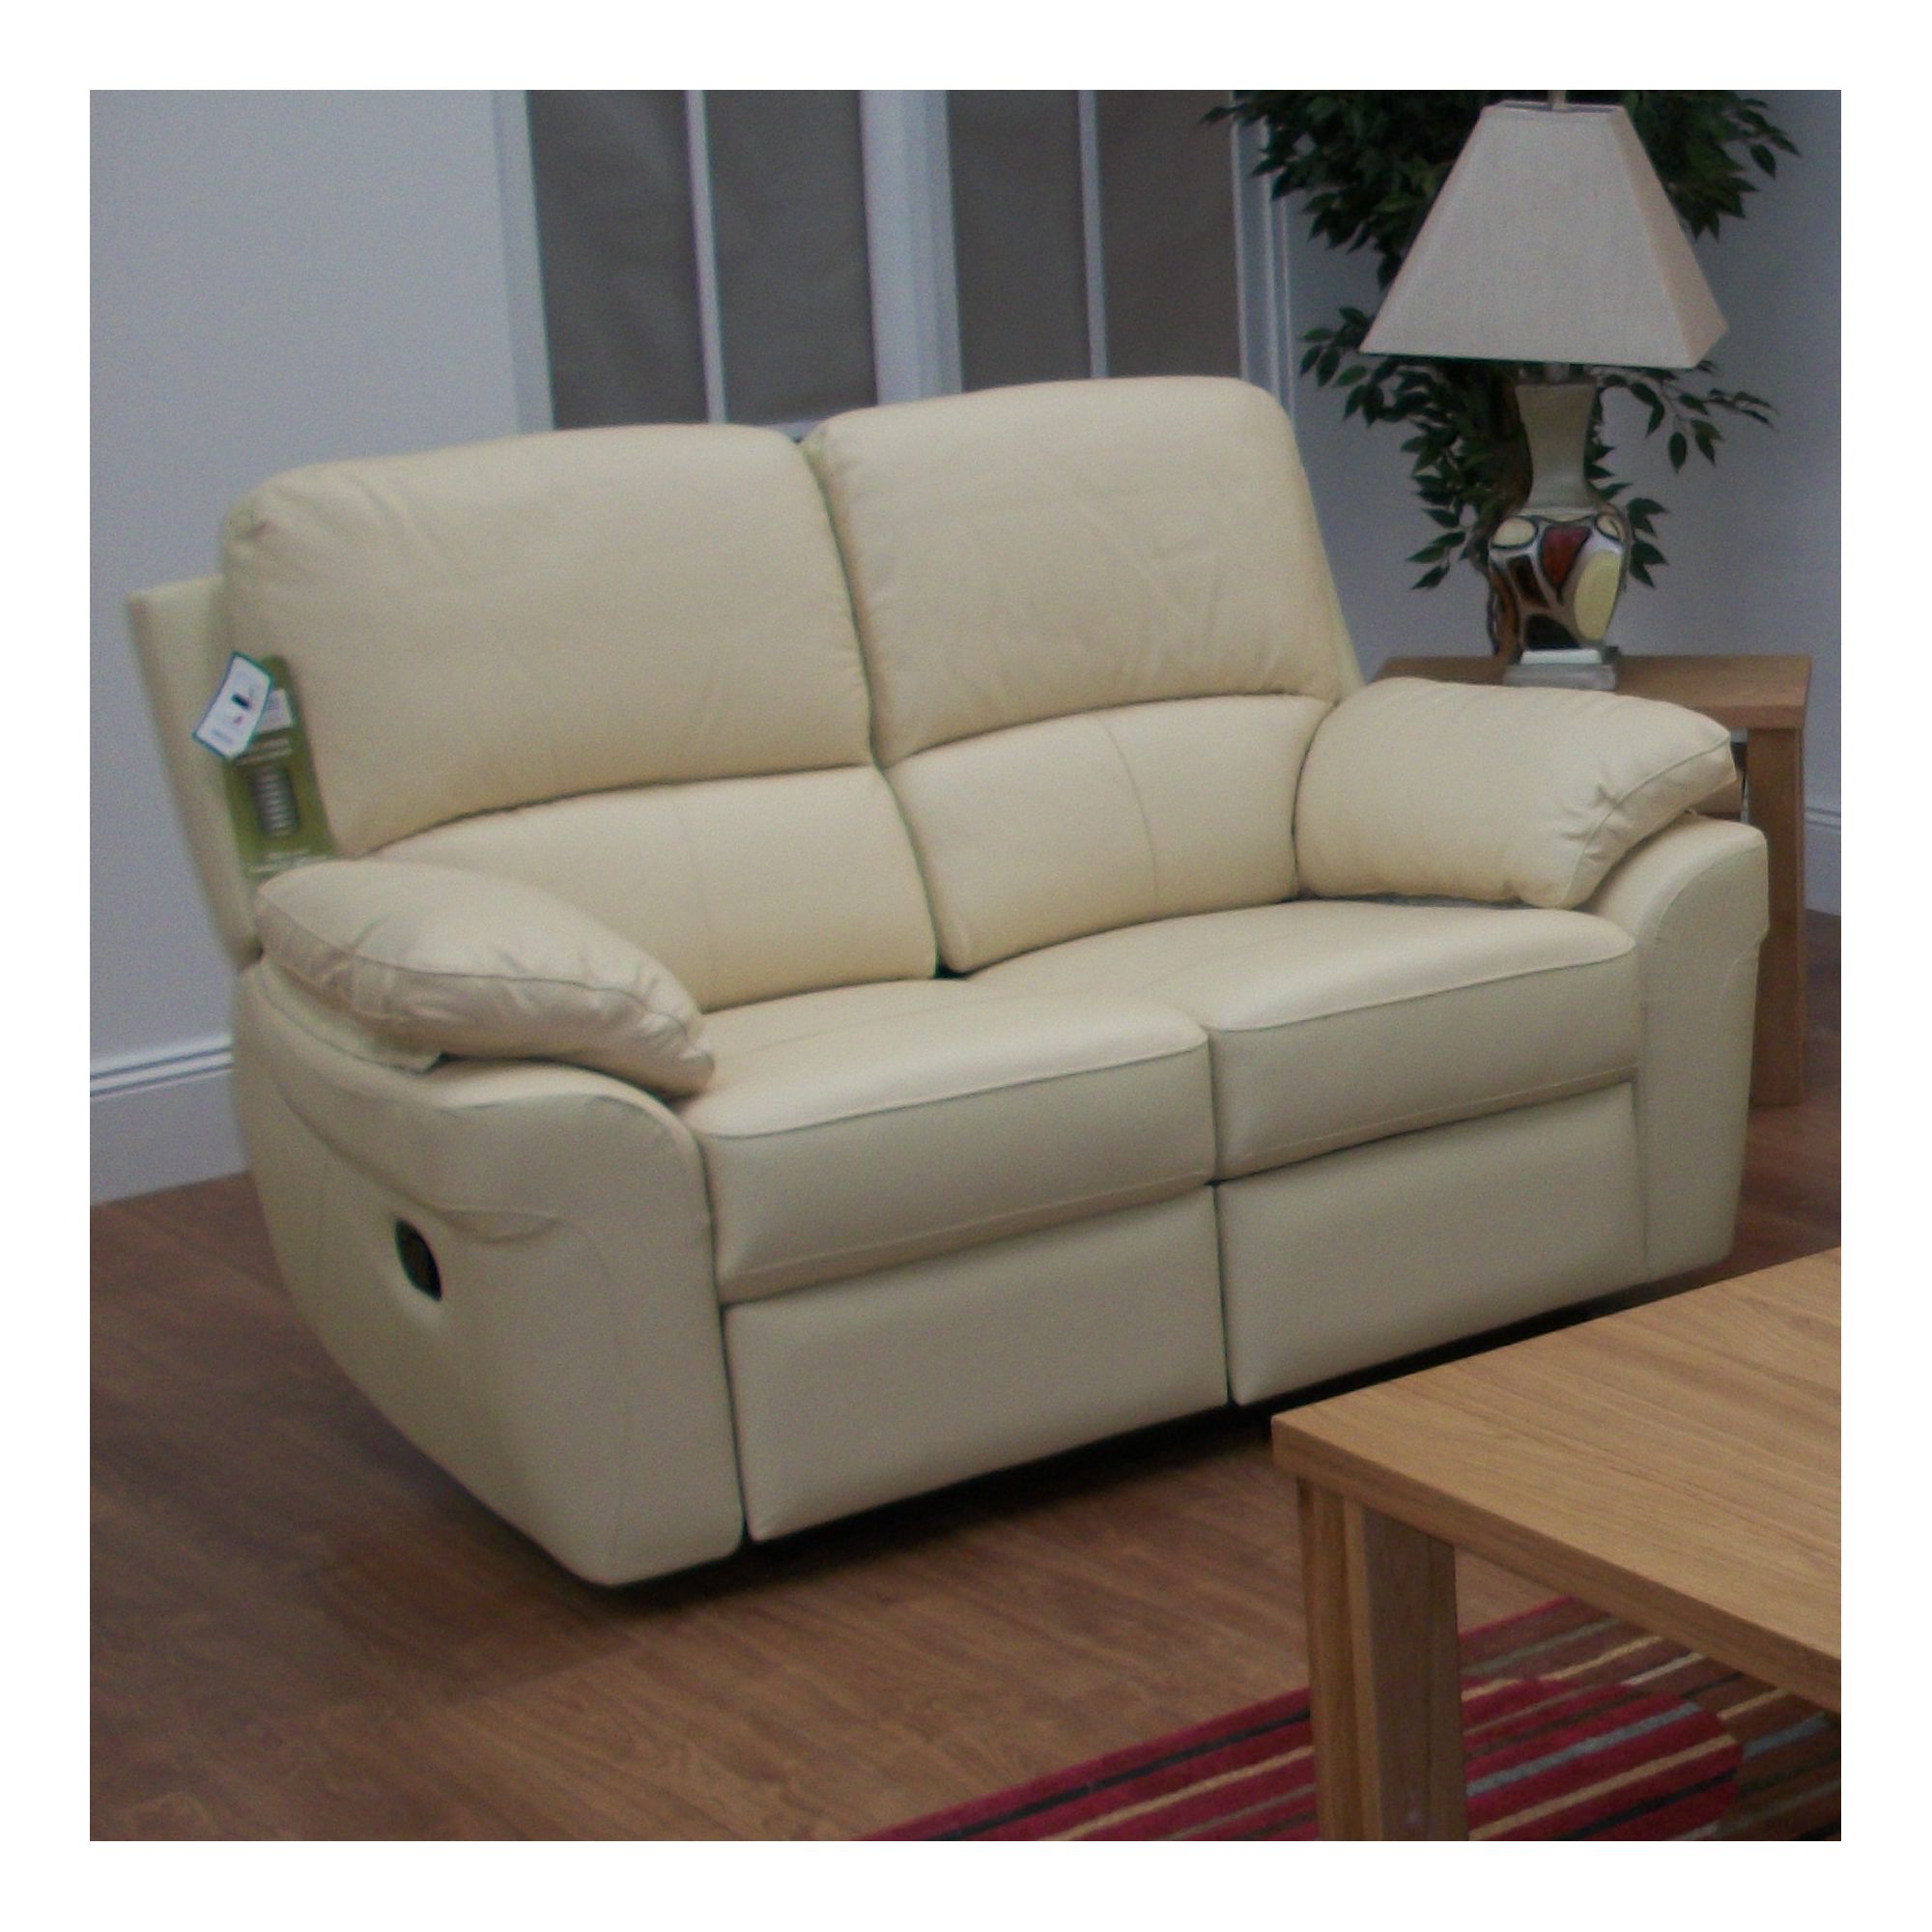 Furniture Link Monzano Two Seat Reclining Sofa in Ivory - Ivory at Tesco Direct